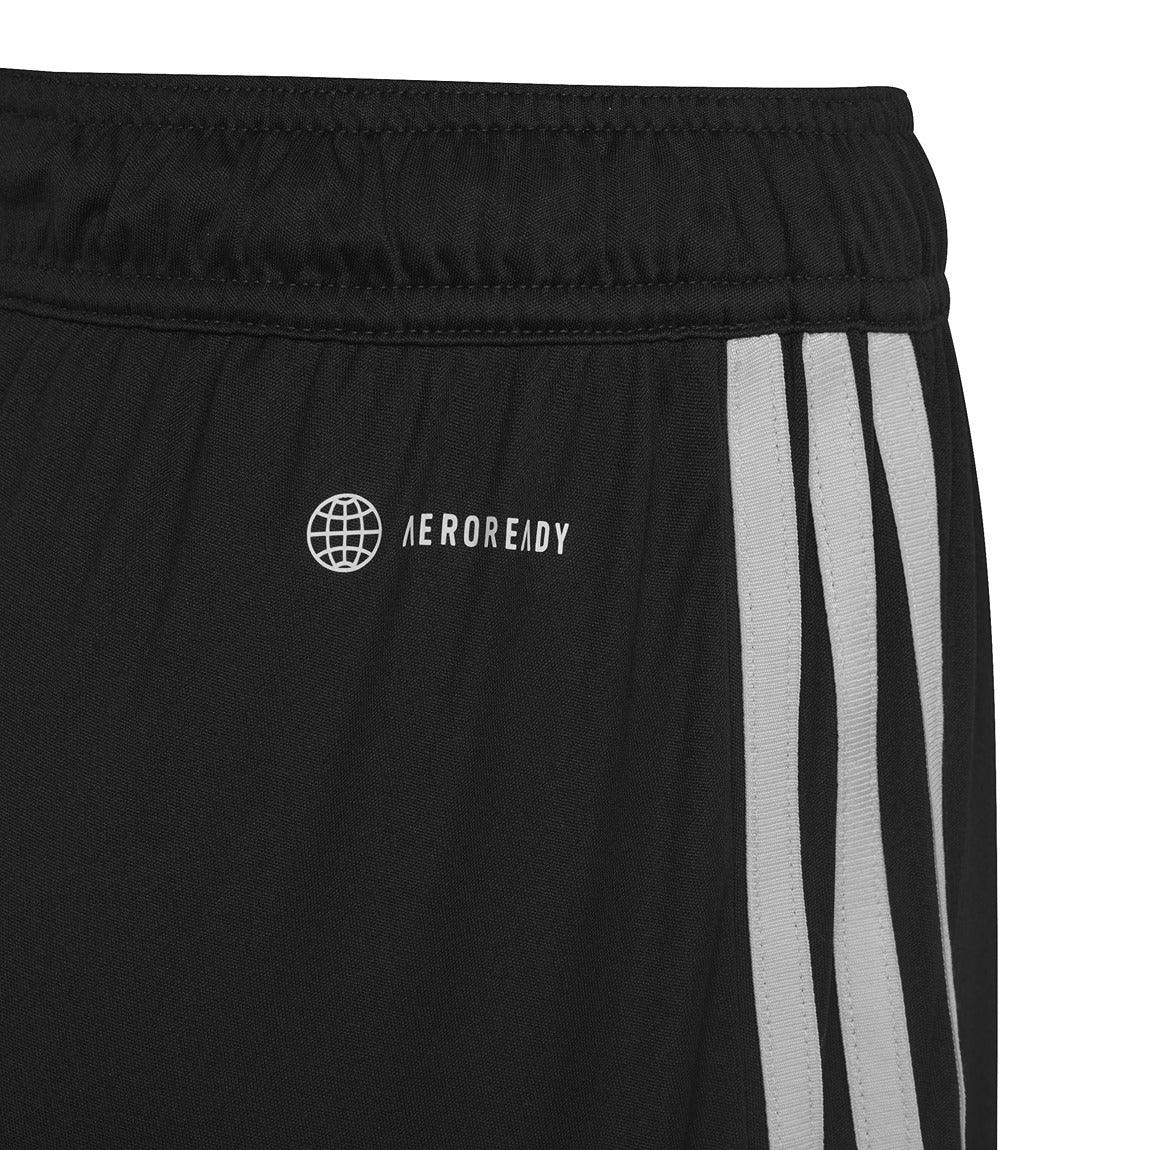 Tiro 23 League Shorts - Youth - Sports Excellence